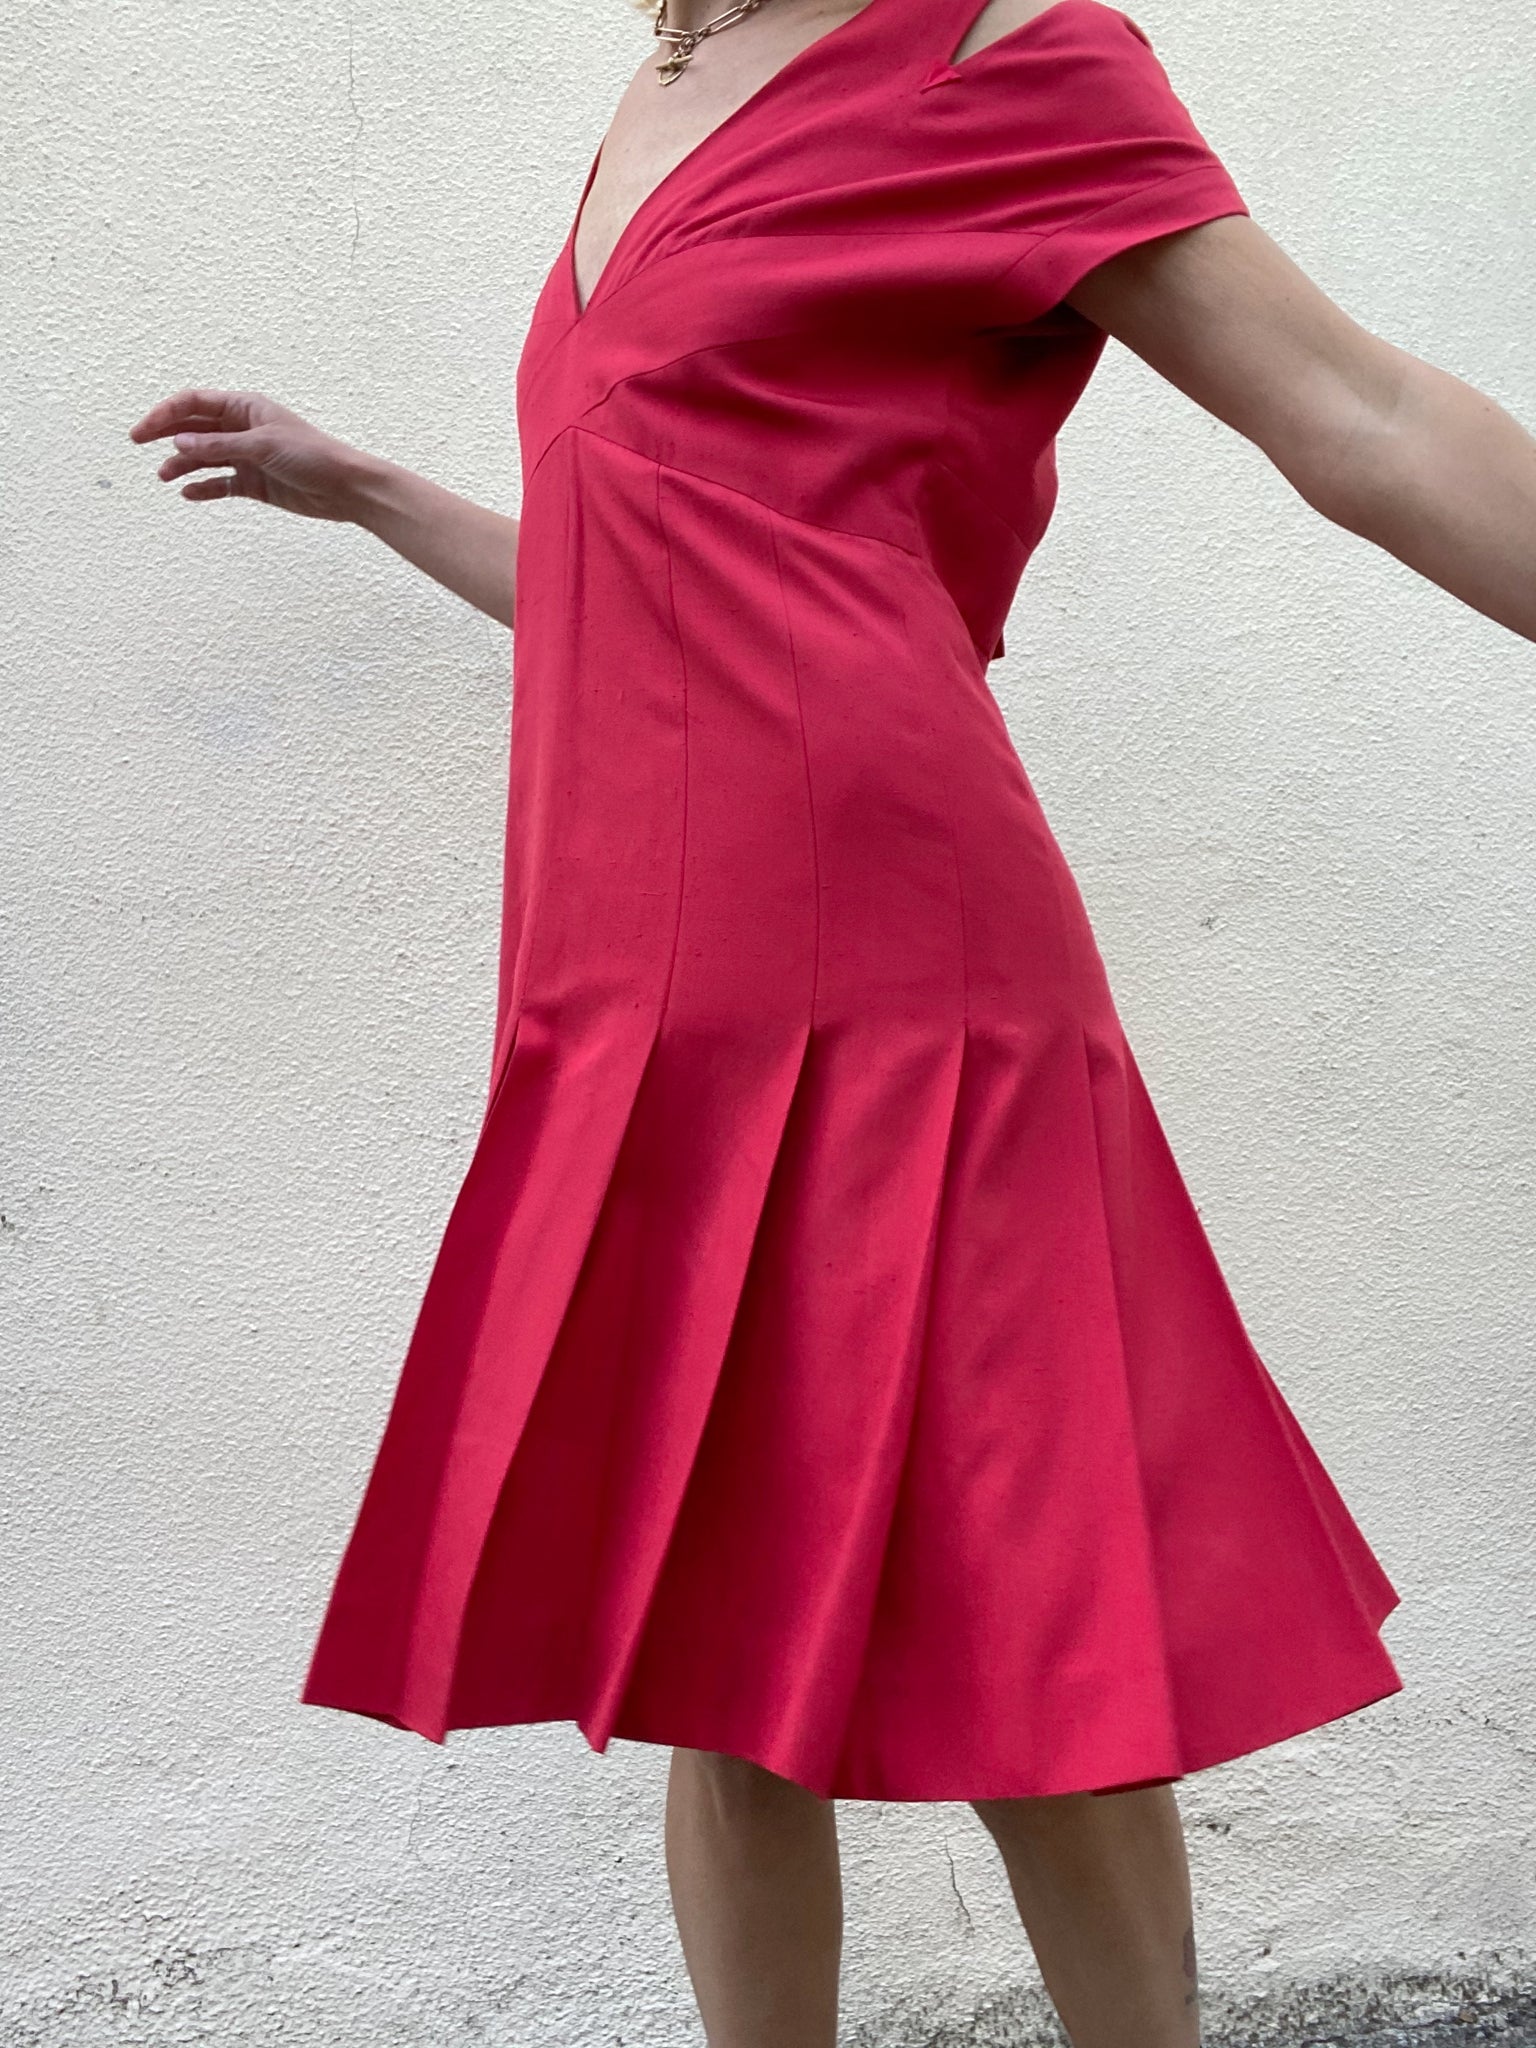 Vintage Chanel Boutique Red Silk Dress – The Curatorial Dept.